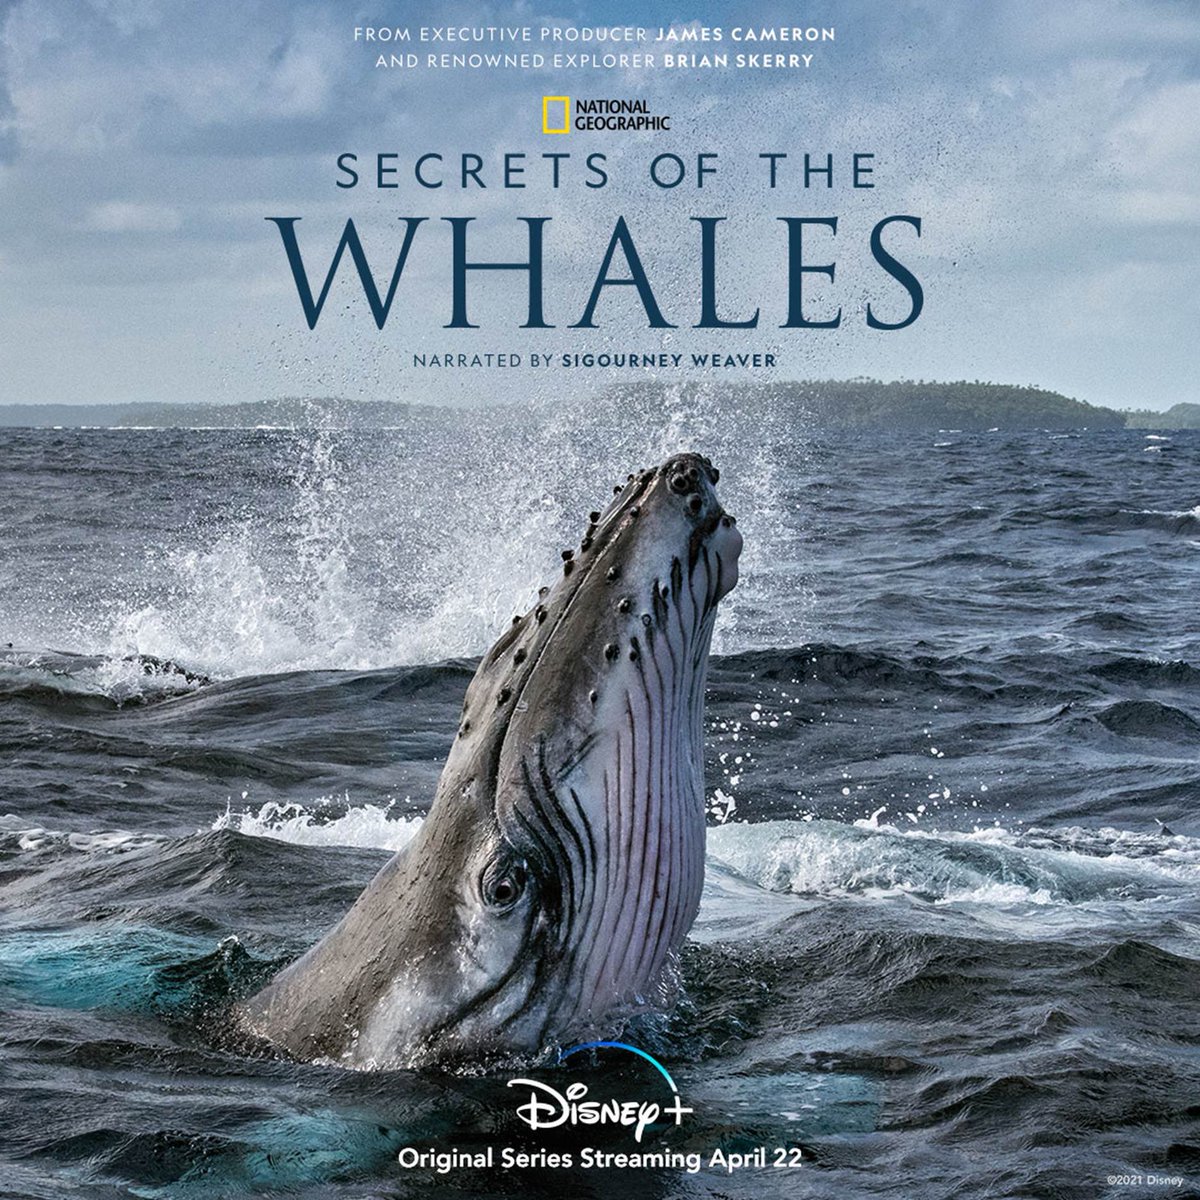 Just finished watching a screening of Secrets of the Whales. It’s fantastic and made me fall in love with Whales all over again! Check it out April 22nd on Disney Plus! ⁦@disneyplus⁩ #NationalGeographic ⁦@NatGeoTV⁩ #JamesCameron #BrianSkerry